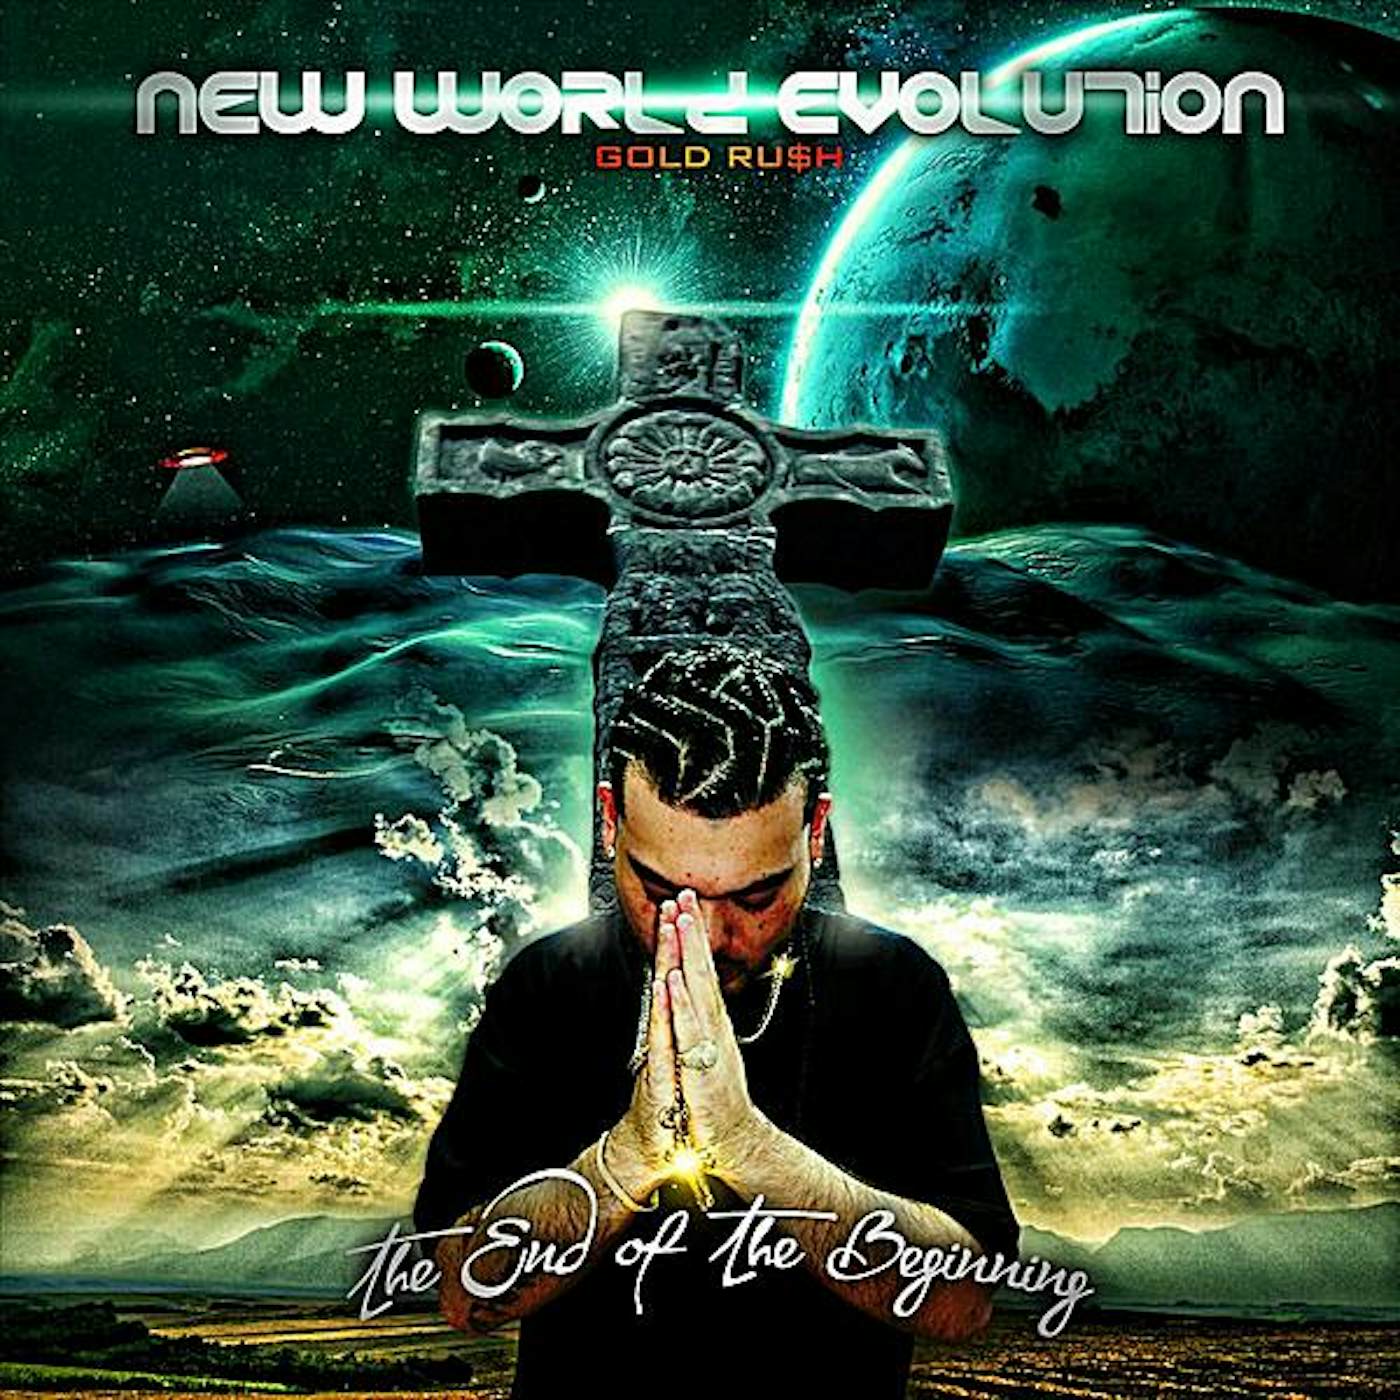 Gold Rush NEW WORLD EVOLUTION (THE END OF THE BEGINNING) CD